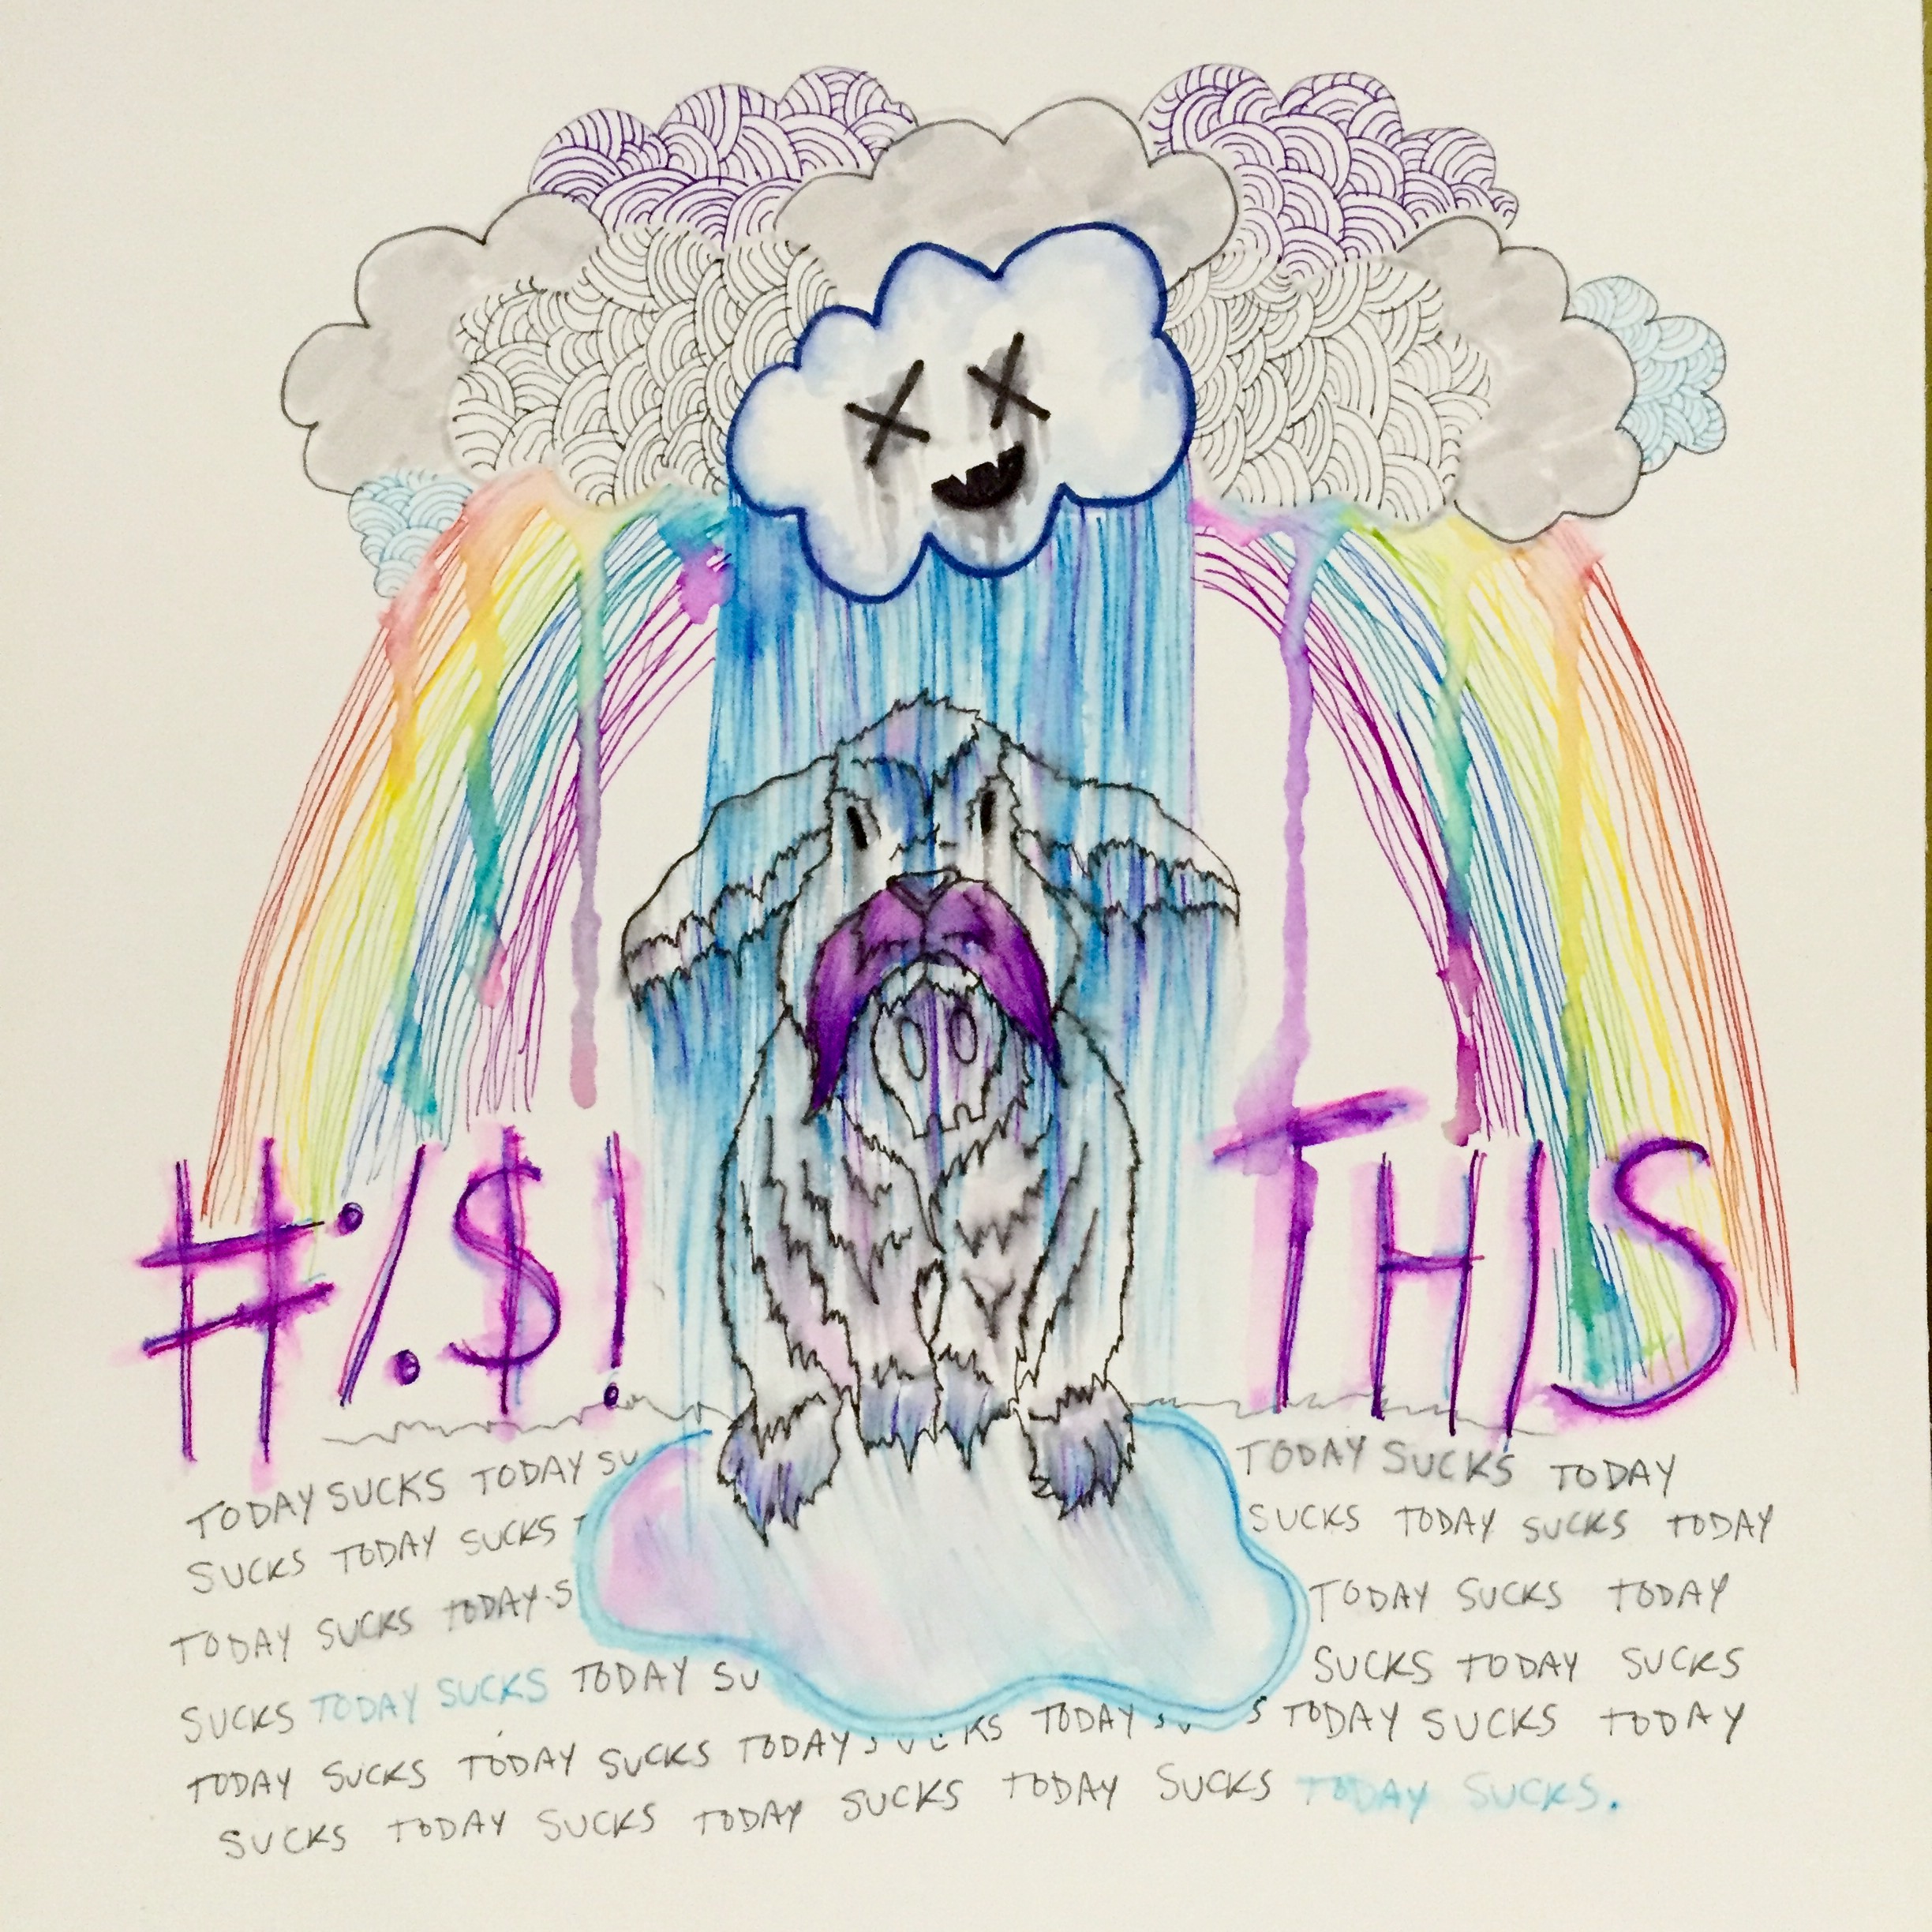 An illustration I did recounting a particularly bad week of a bunny being rained on